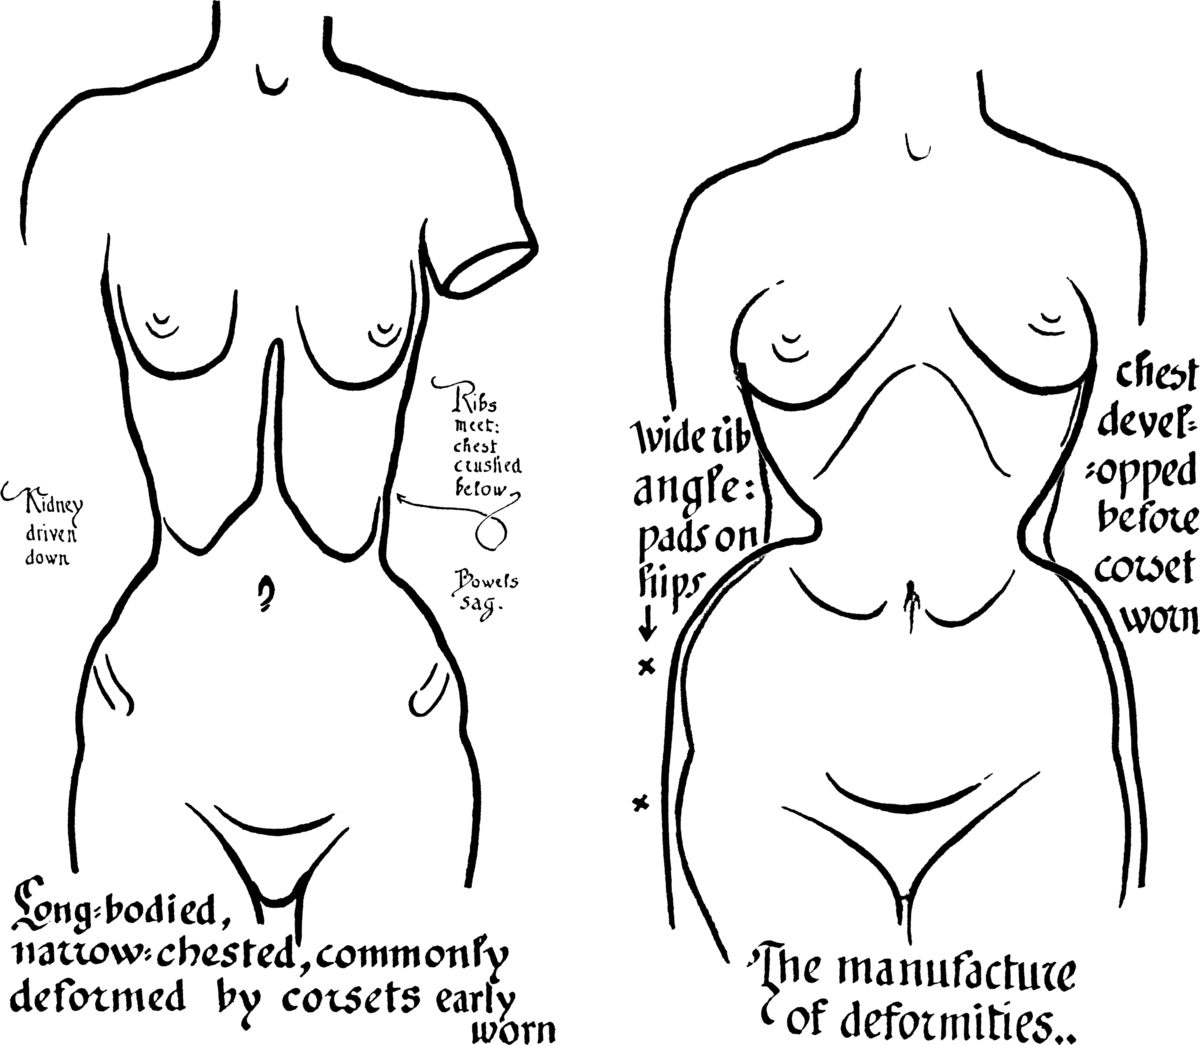 File:Toleration of the corset1028fig6-7.png - Wikimedia Commons